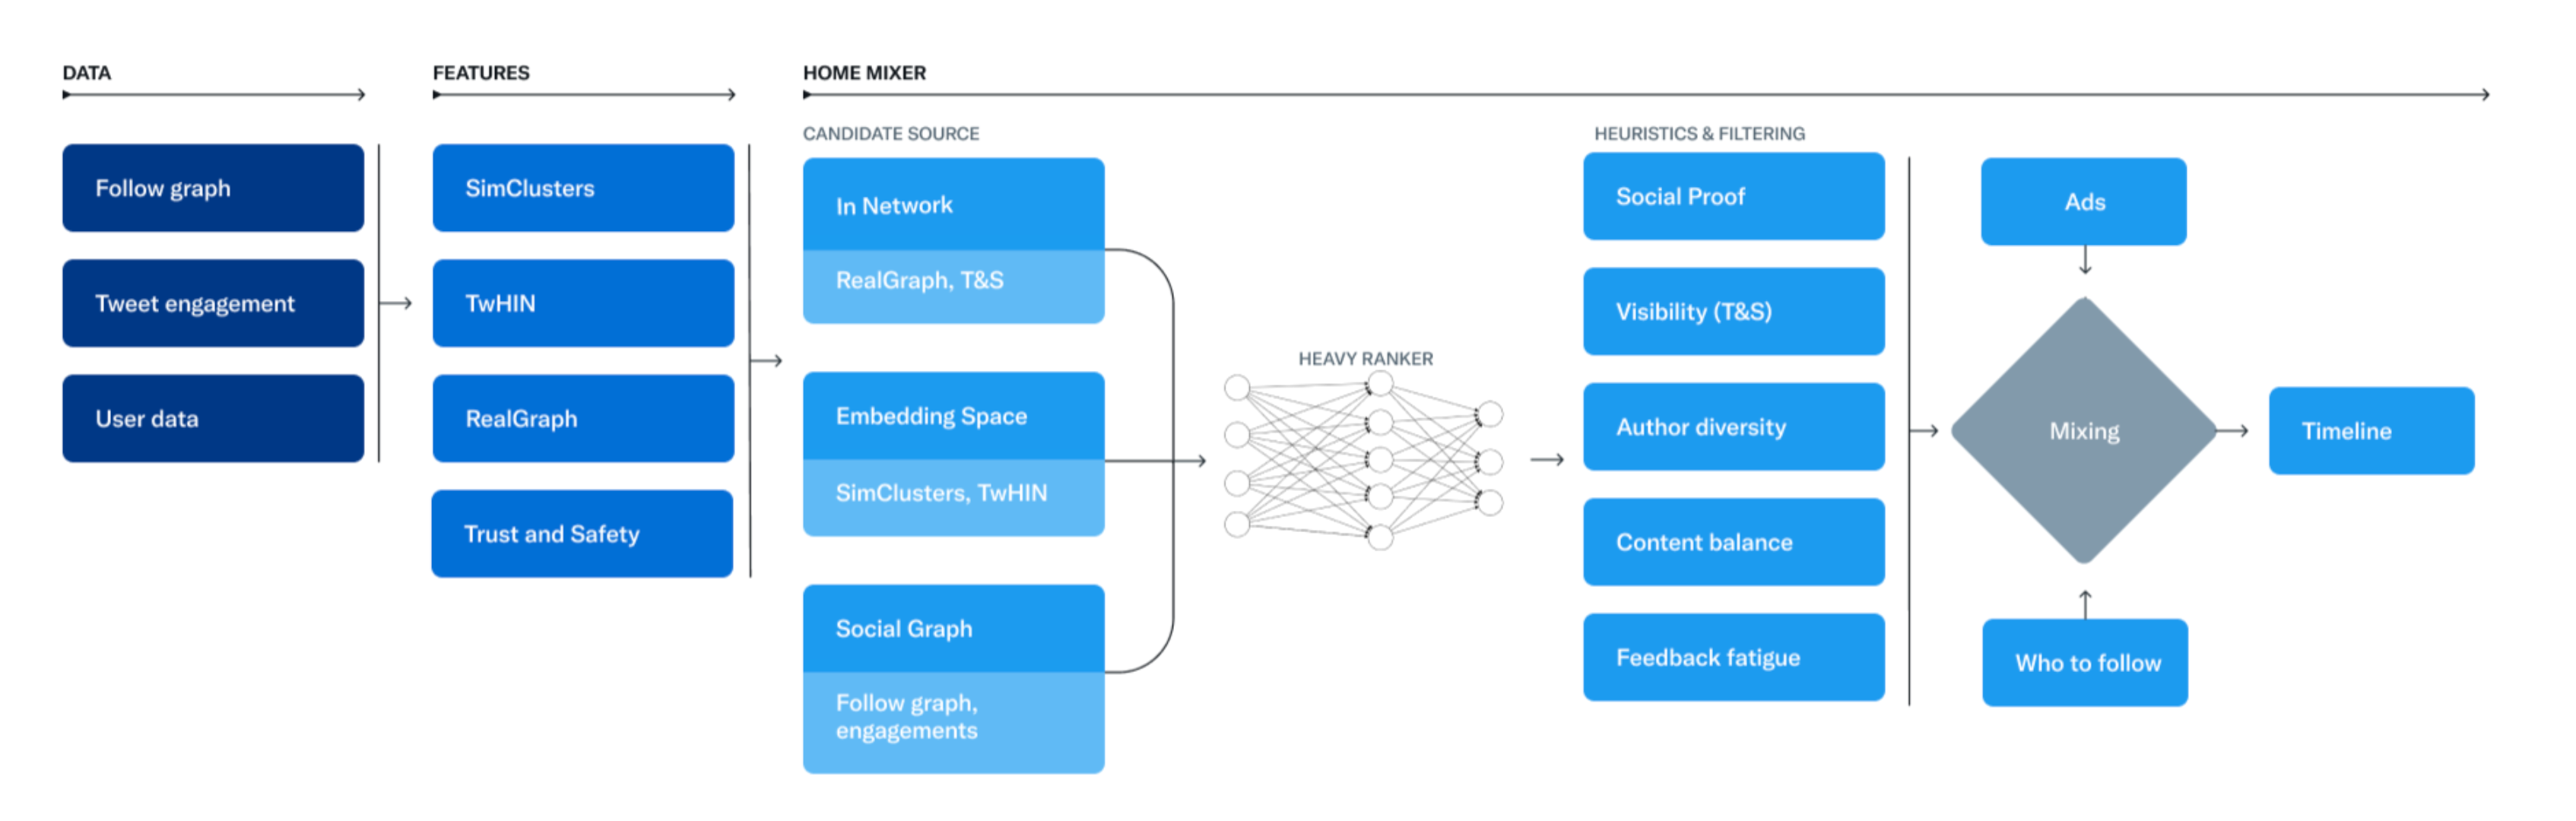 Twitter reveals some of its source code, including its recommendation algorithm